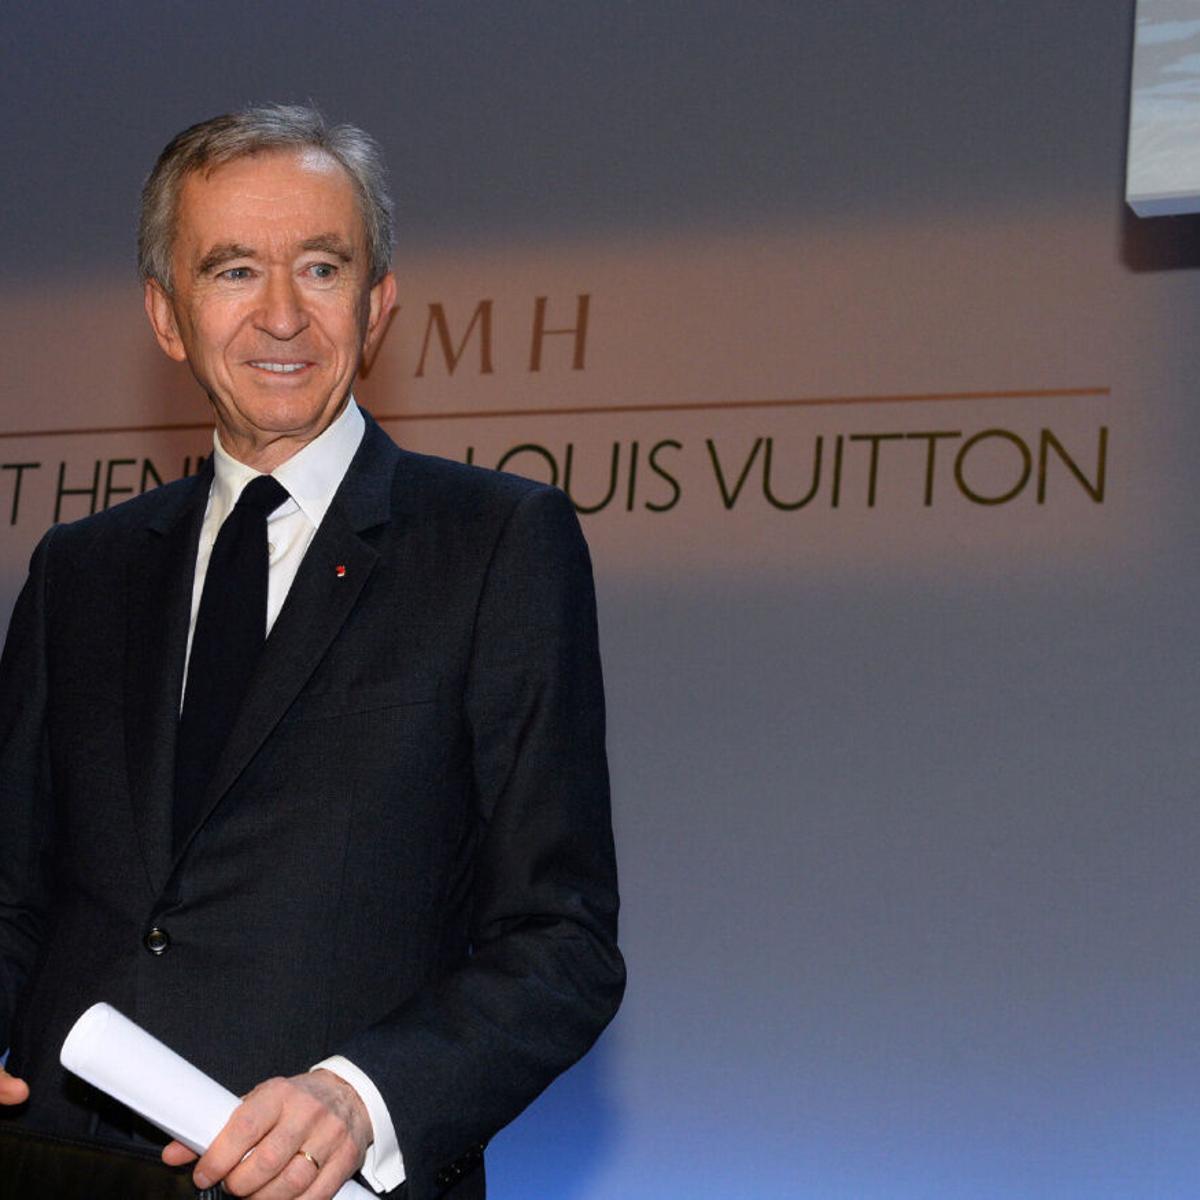 Louis Vuitton owner moves to take over Christian Dior in $17-billion deal